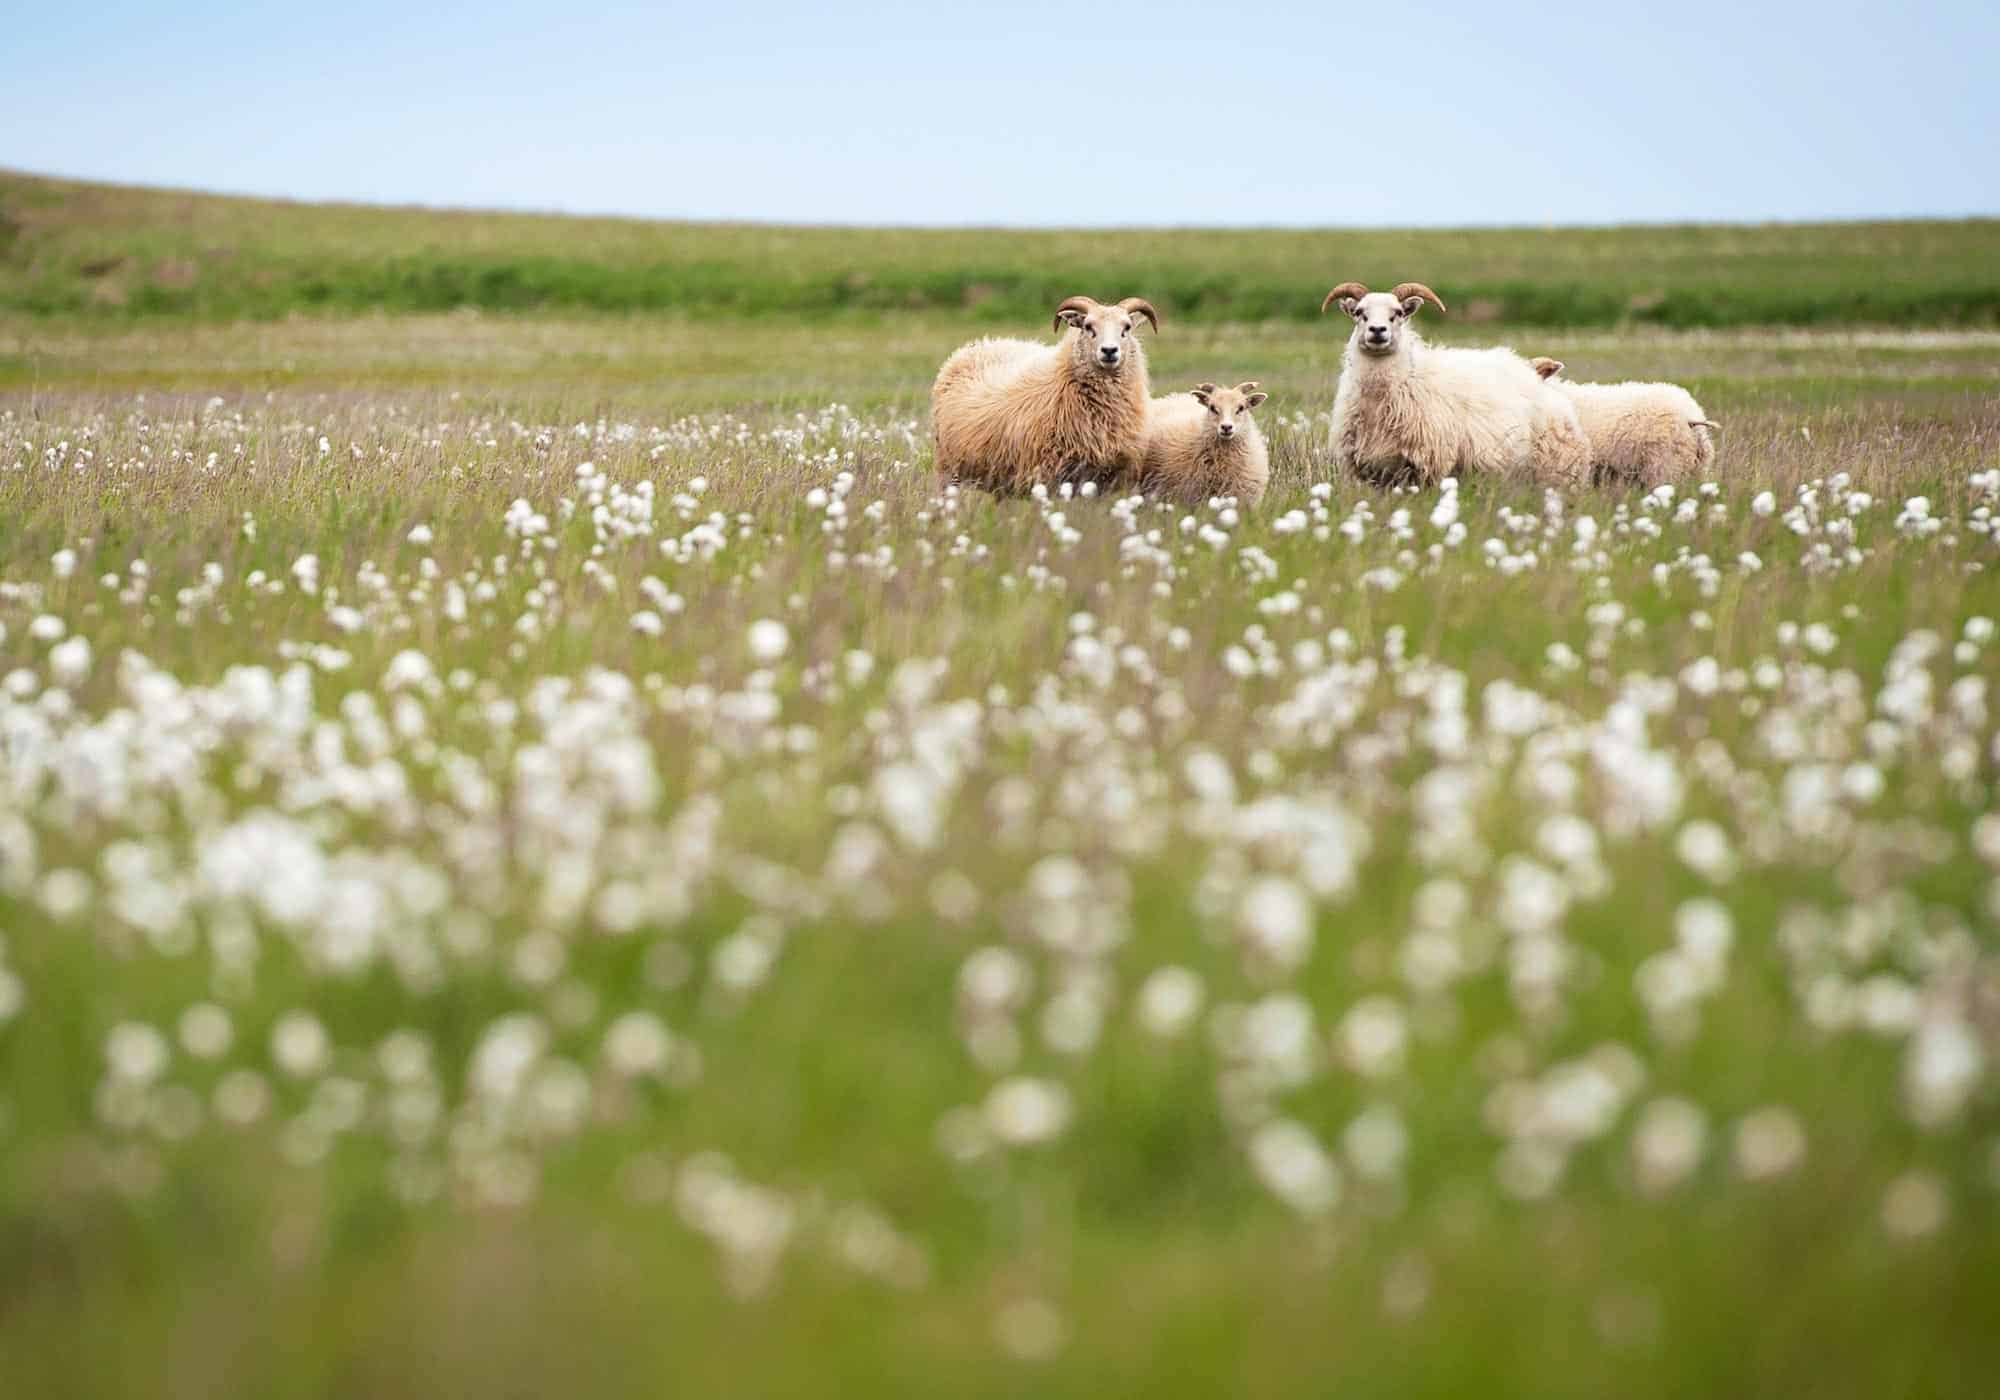 Sheep and lambs stand in a grassy field filled with white flowers.